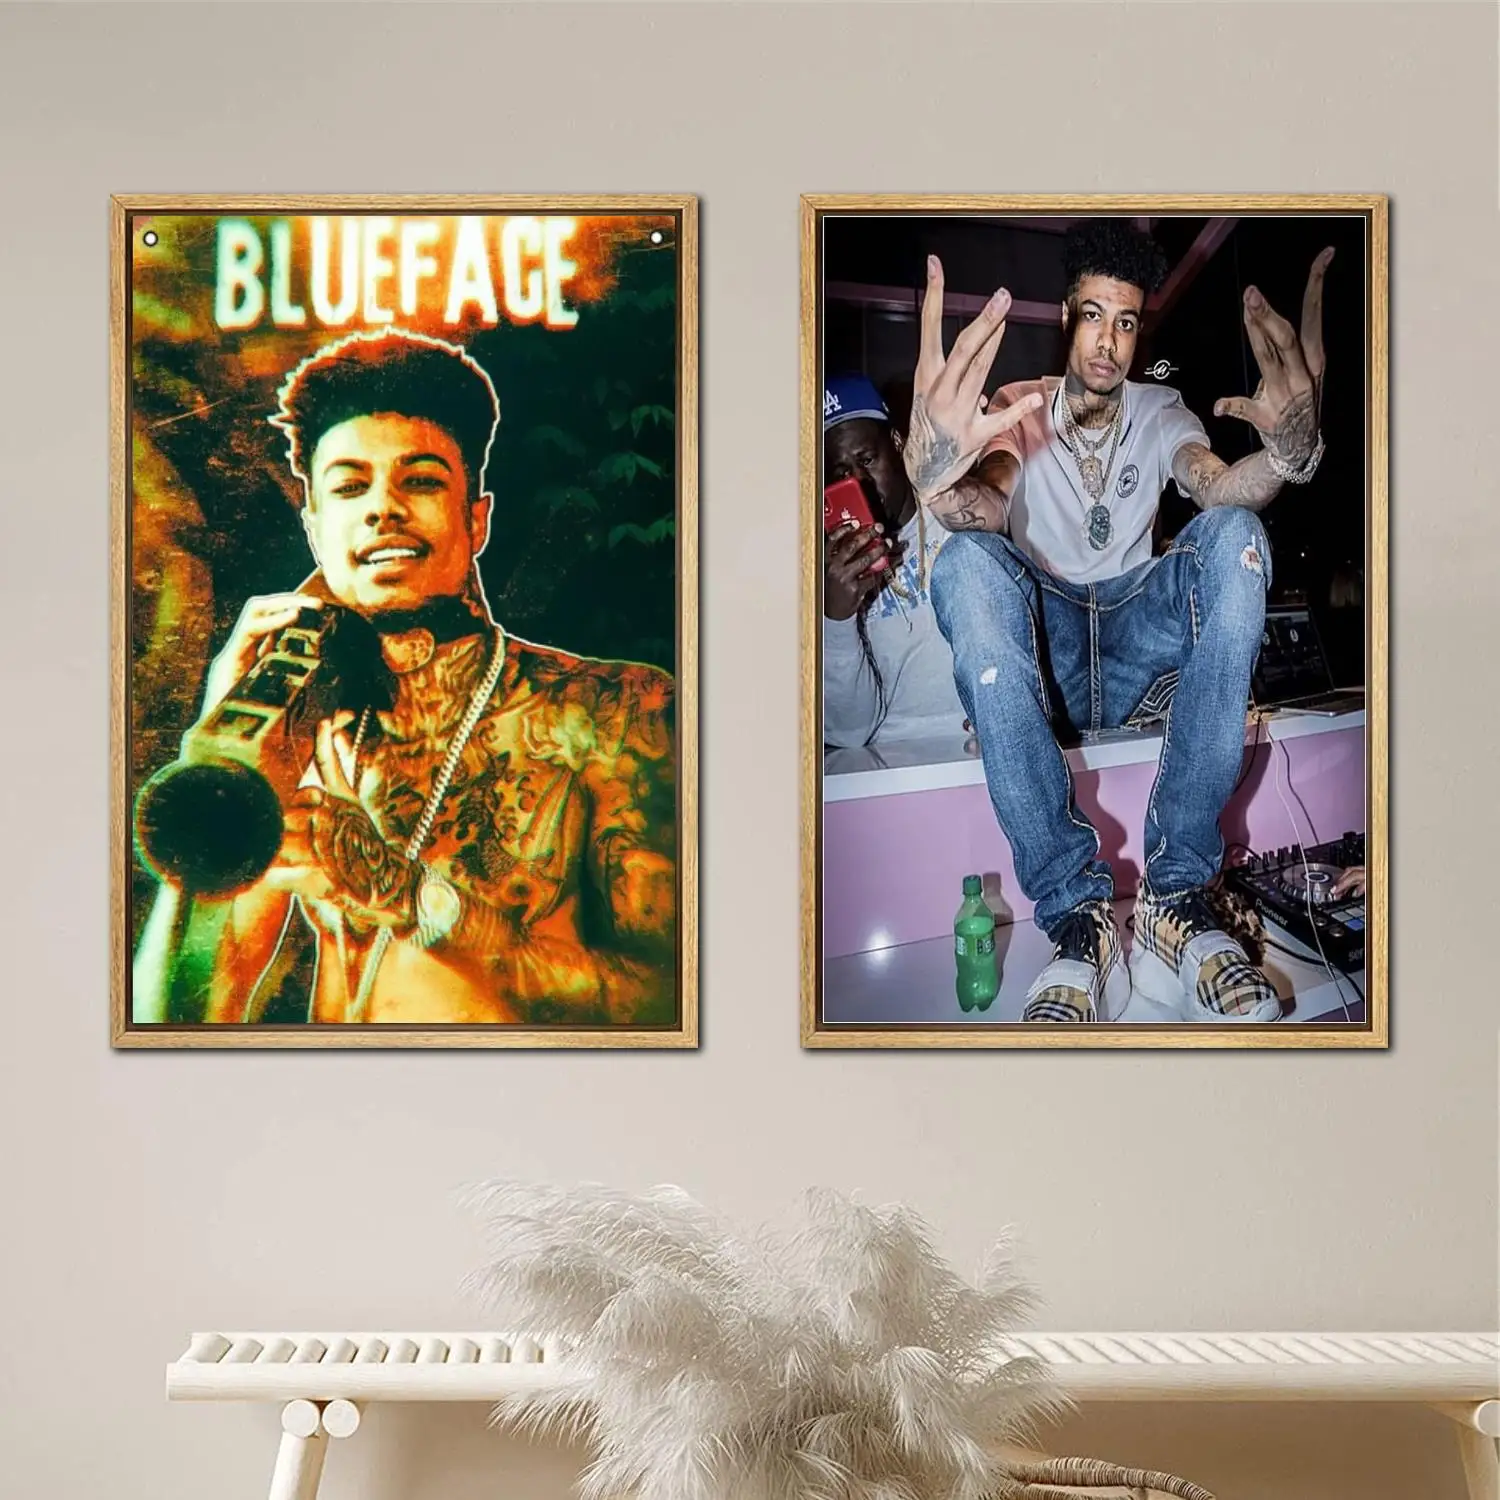 Blueface Poster Painting 24x36 Wall Art Canvas Posters room decor Modern Family bedroom Decoration Art wall decor